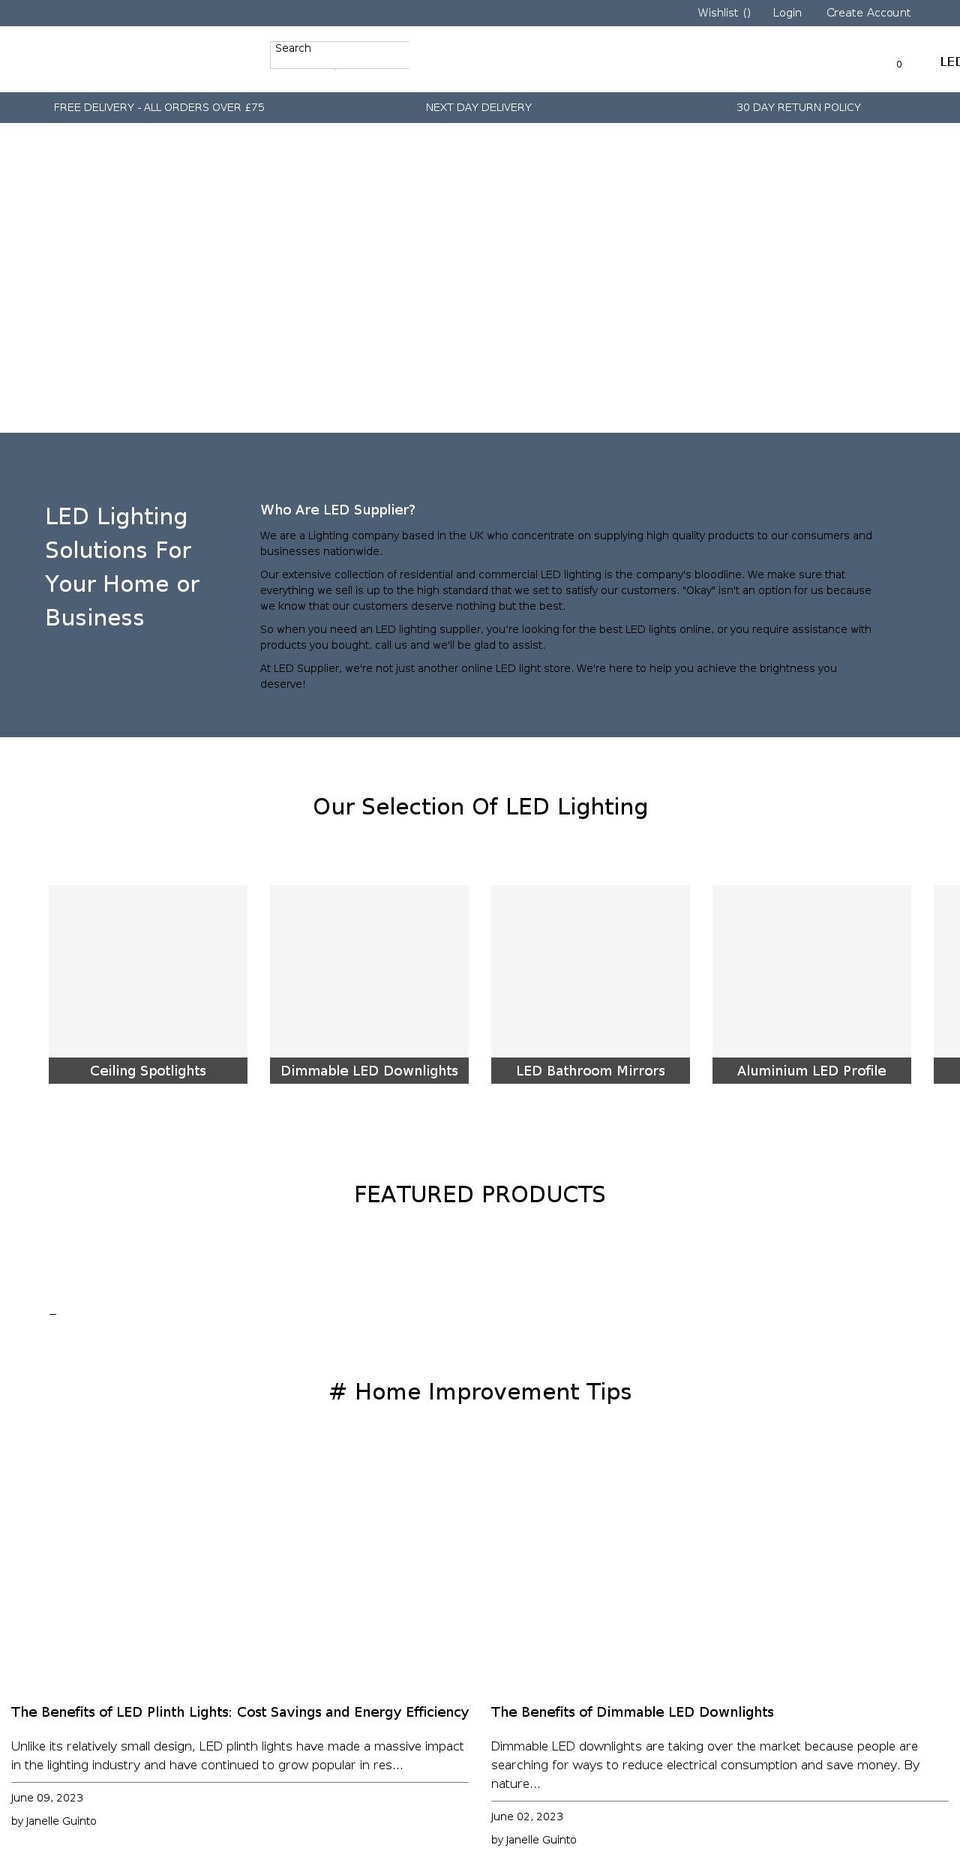 ultimate Shopify theme site example ledsupplier.co.uk